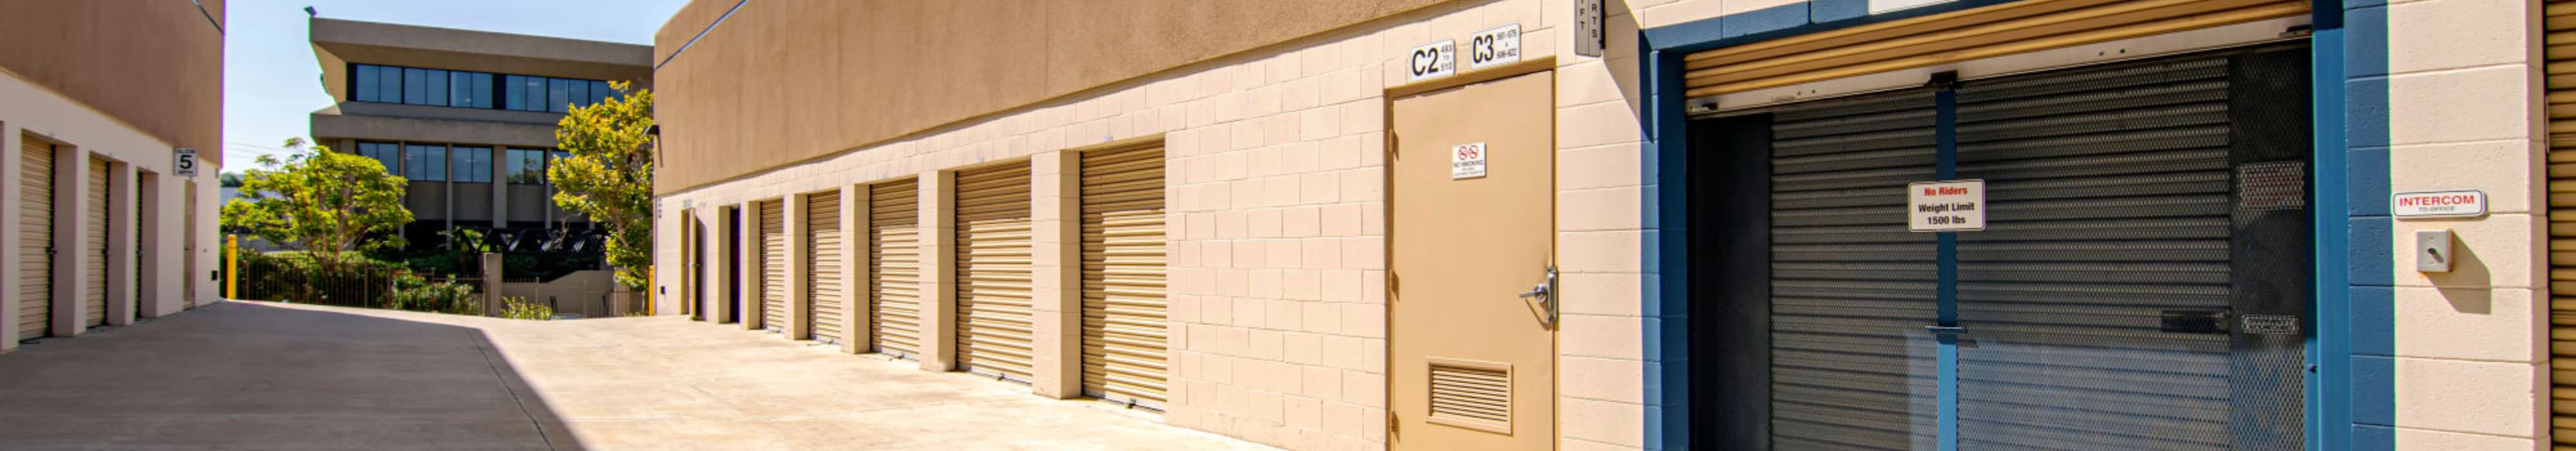 Outdoor units at Sorrento Valley Self Storage in San Diego, California